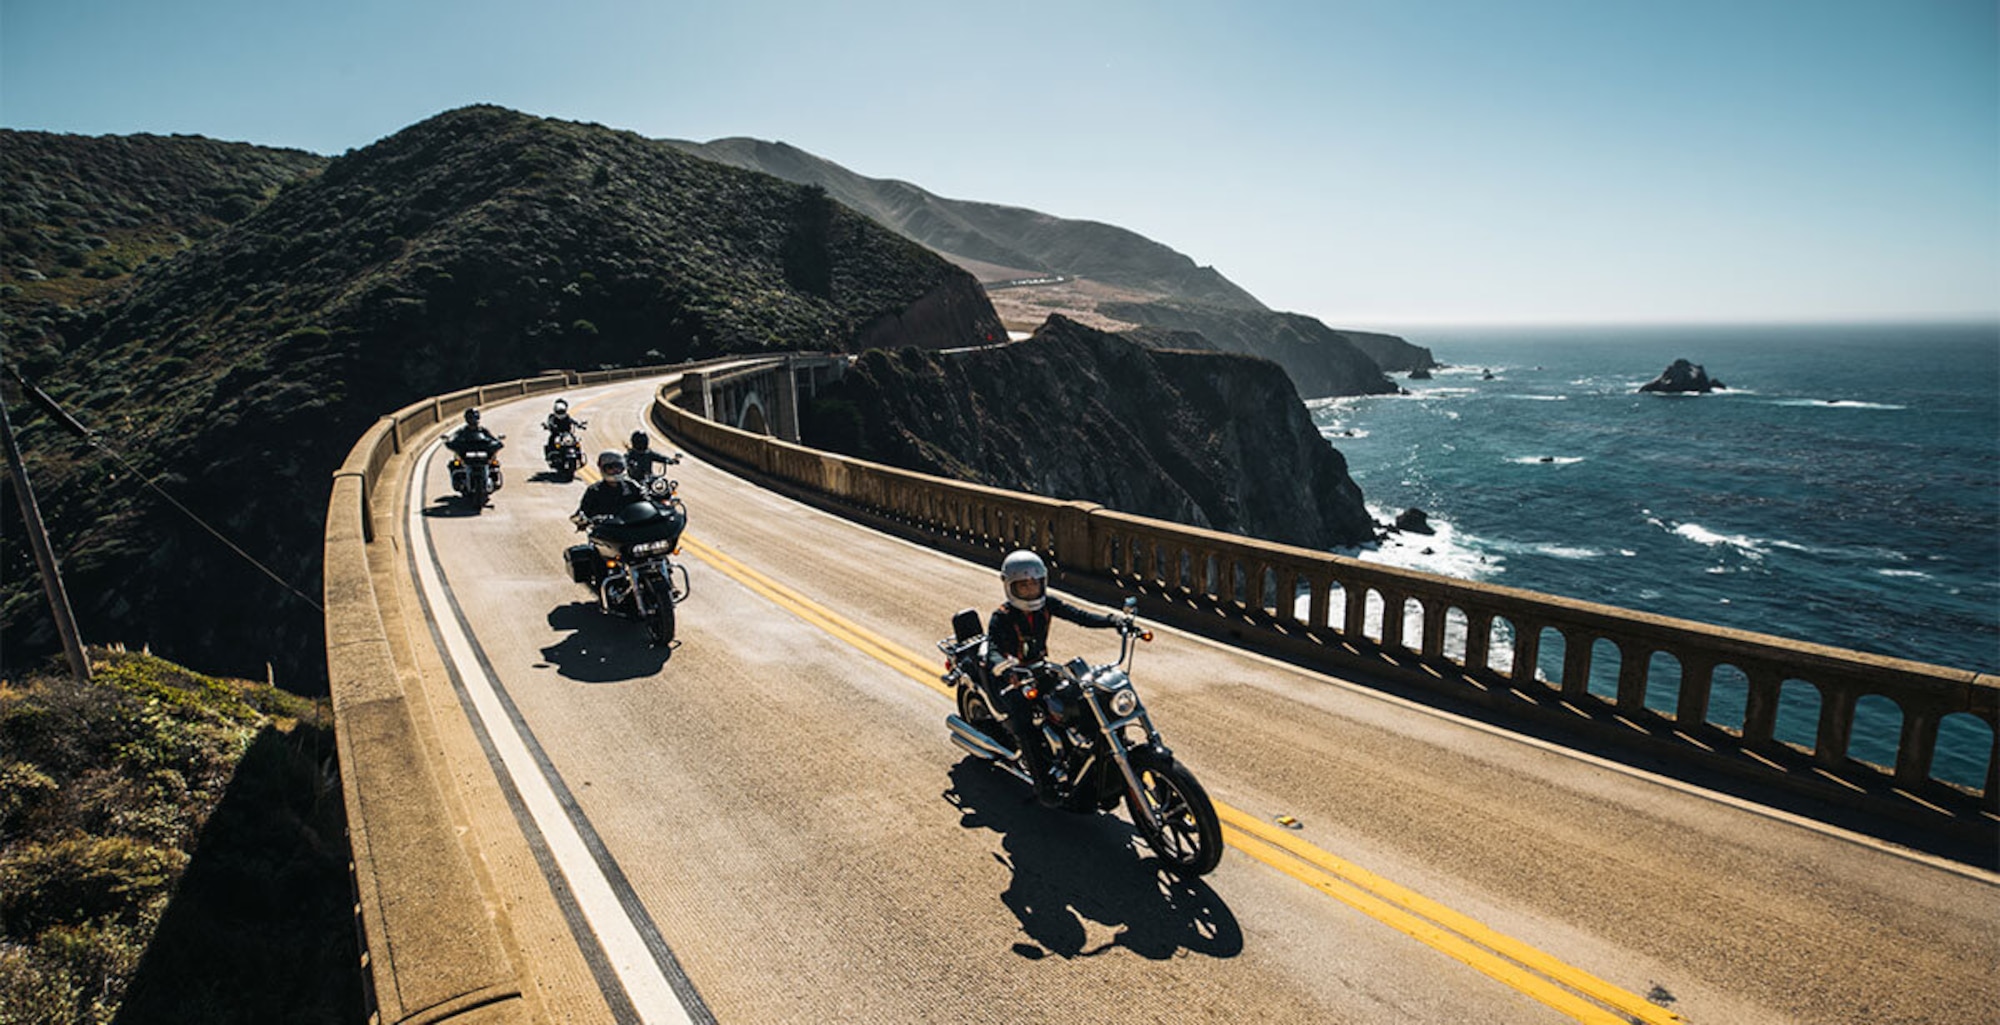 Photo with 4 motorcycle riders driving down a road along the California coast.